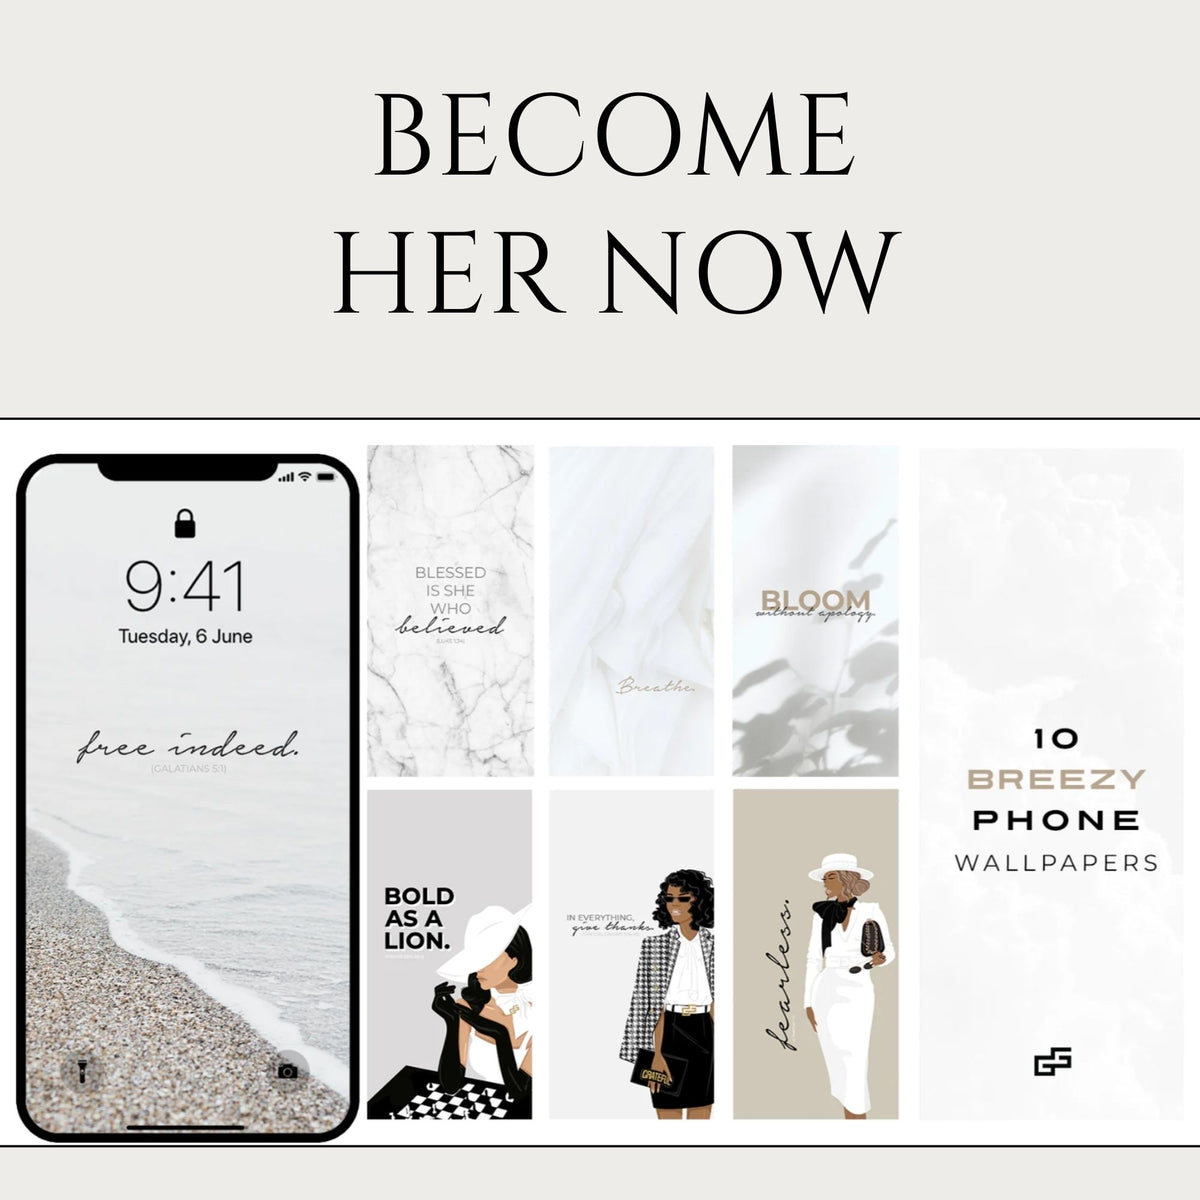 BECOME HER NOW | Phone Wallpaper Bundle - Breezy Aesthetic | Motivational Phrases with Scripture References | Digital Download